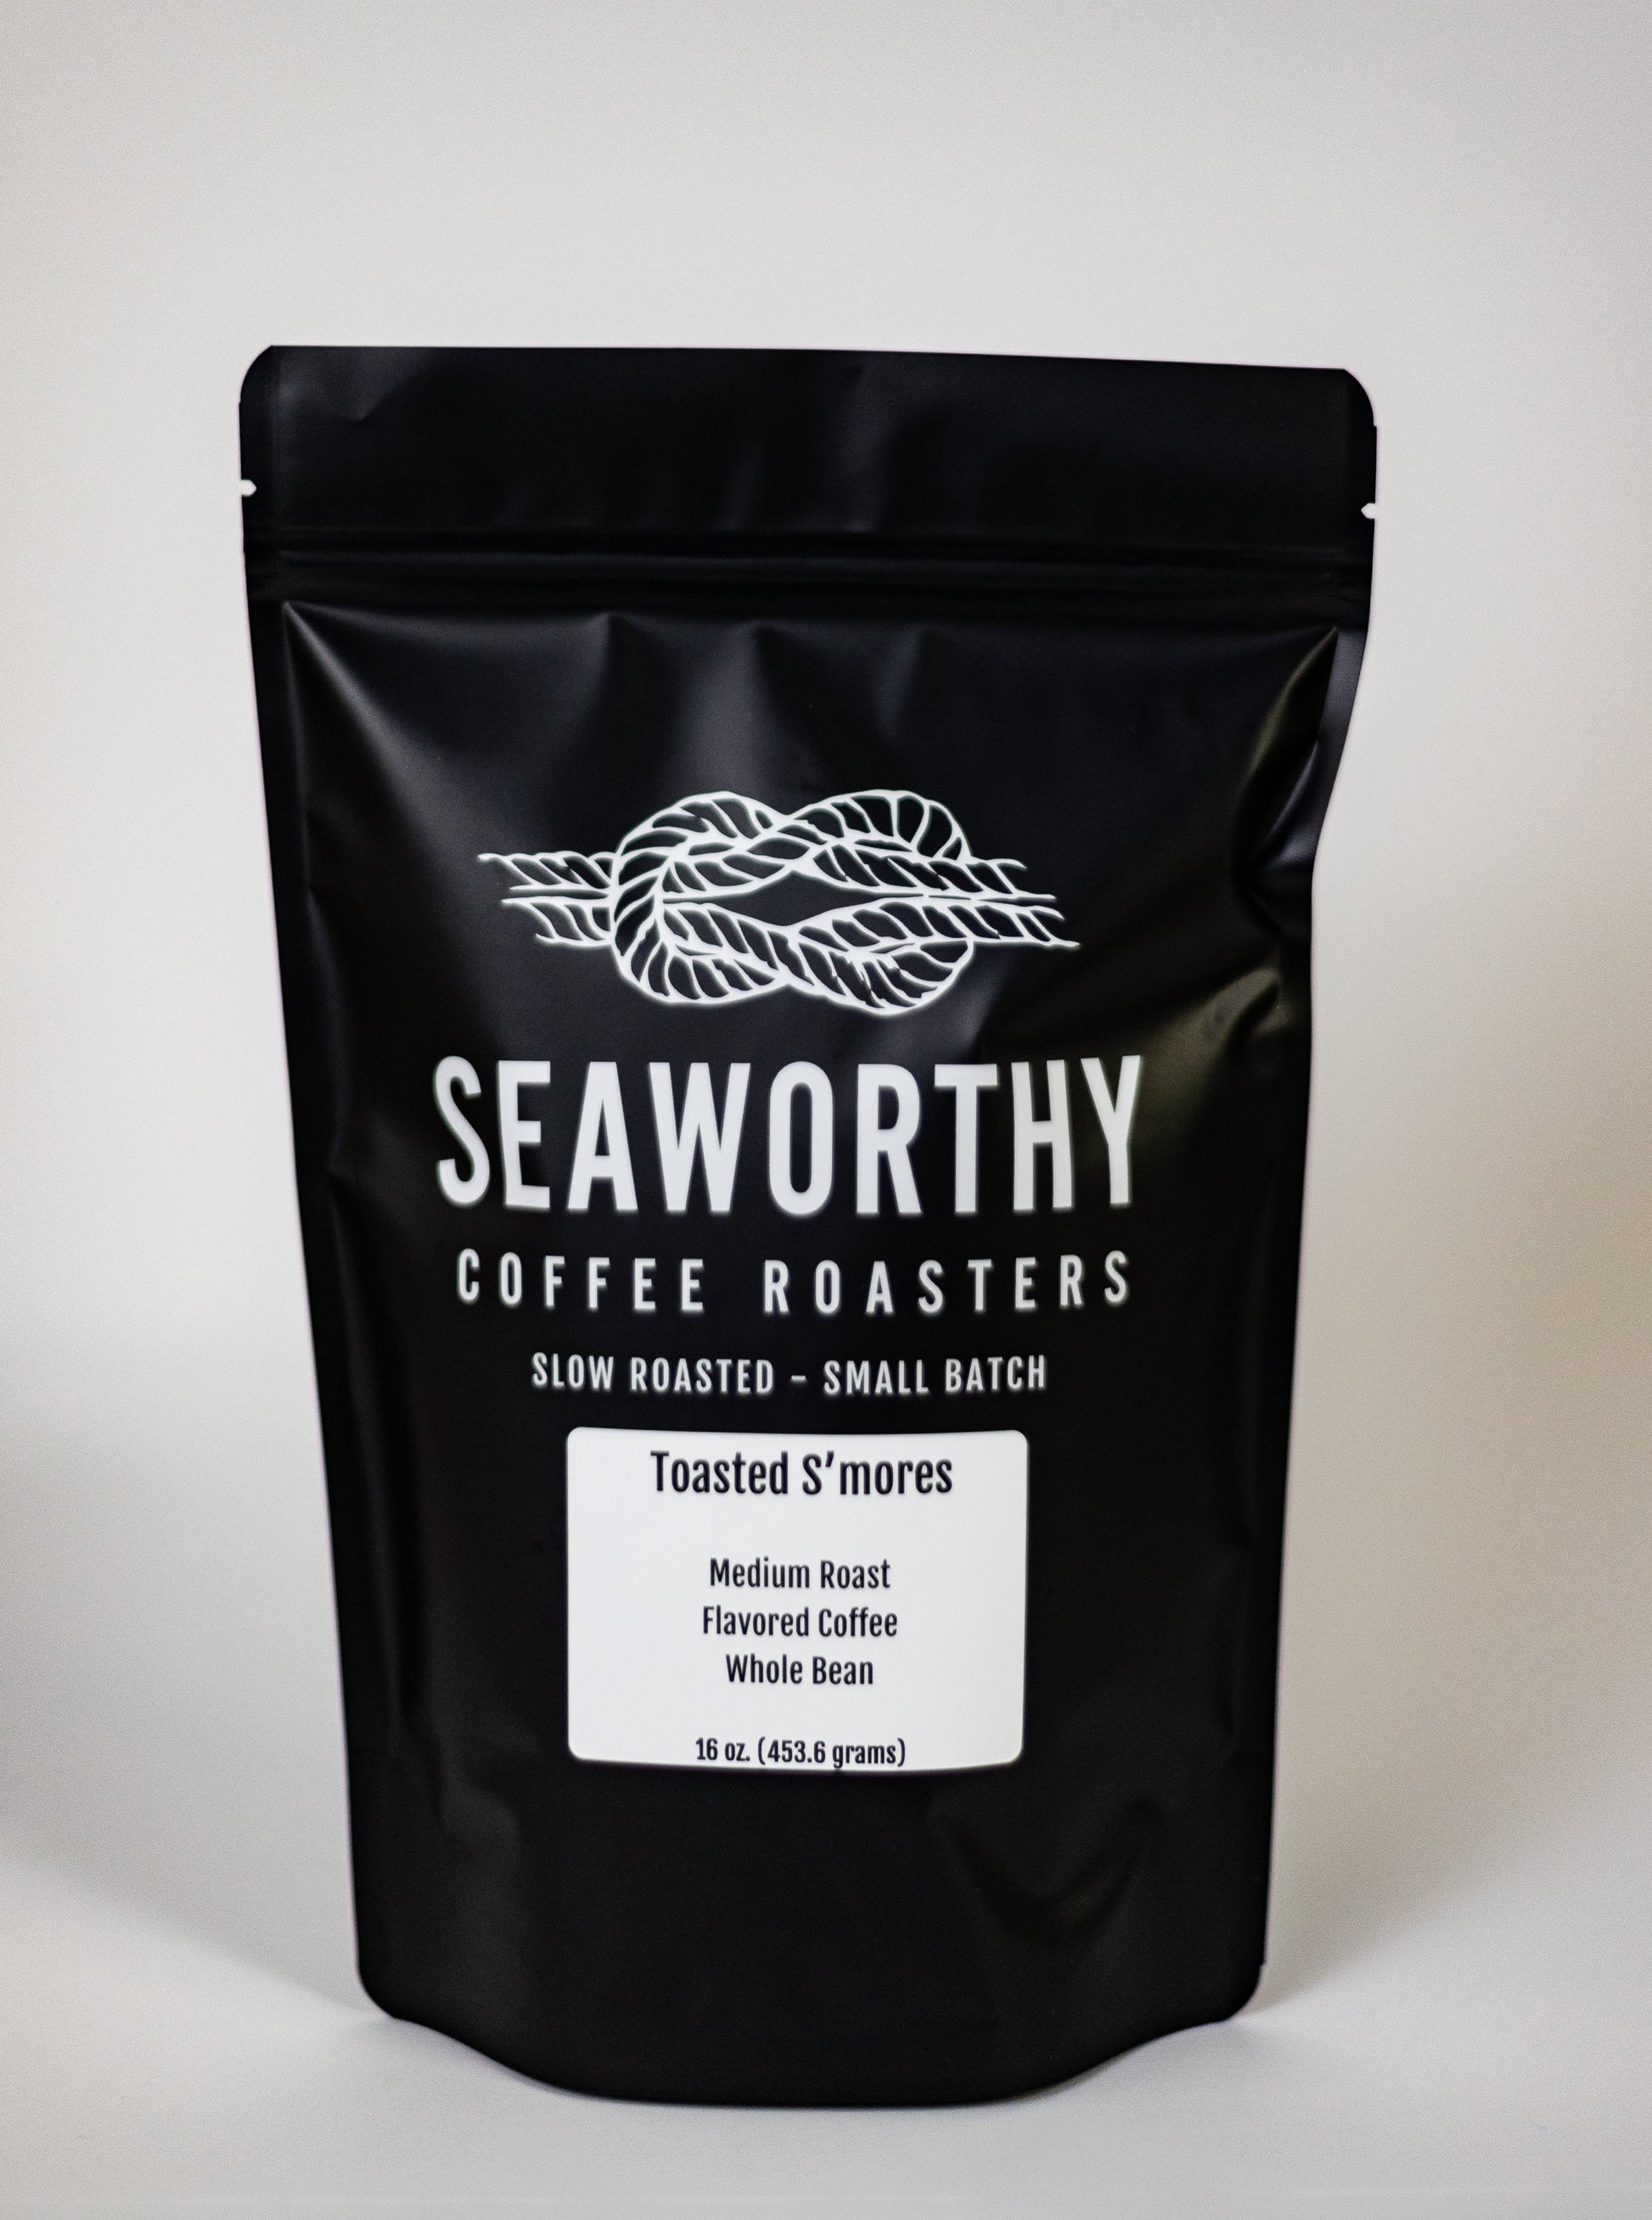 Seaworthy slow roasted, small batch coffee. Toasted S'mores flavored coffee brings the warm, toasty feel of iconic S'mores to your cup of coffee. This flavor pairs exceptionally well with coffee and we highly recommend it. Grab the mallows and a good stick; you're in for a real treat!